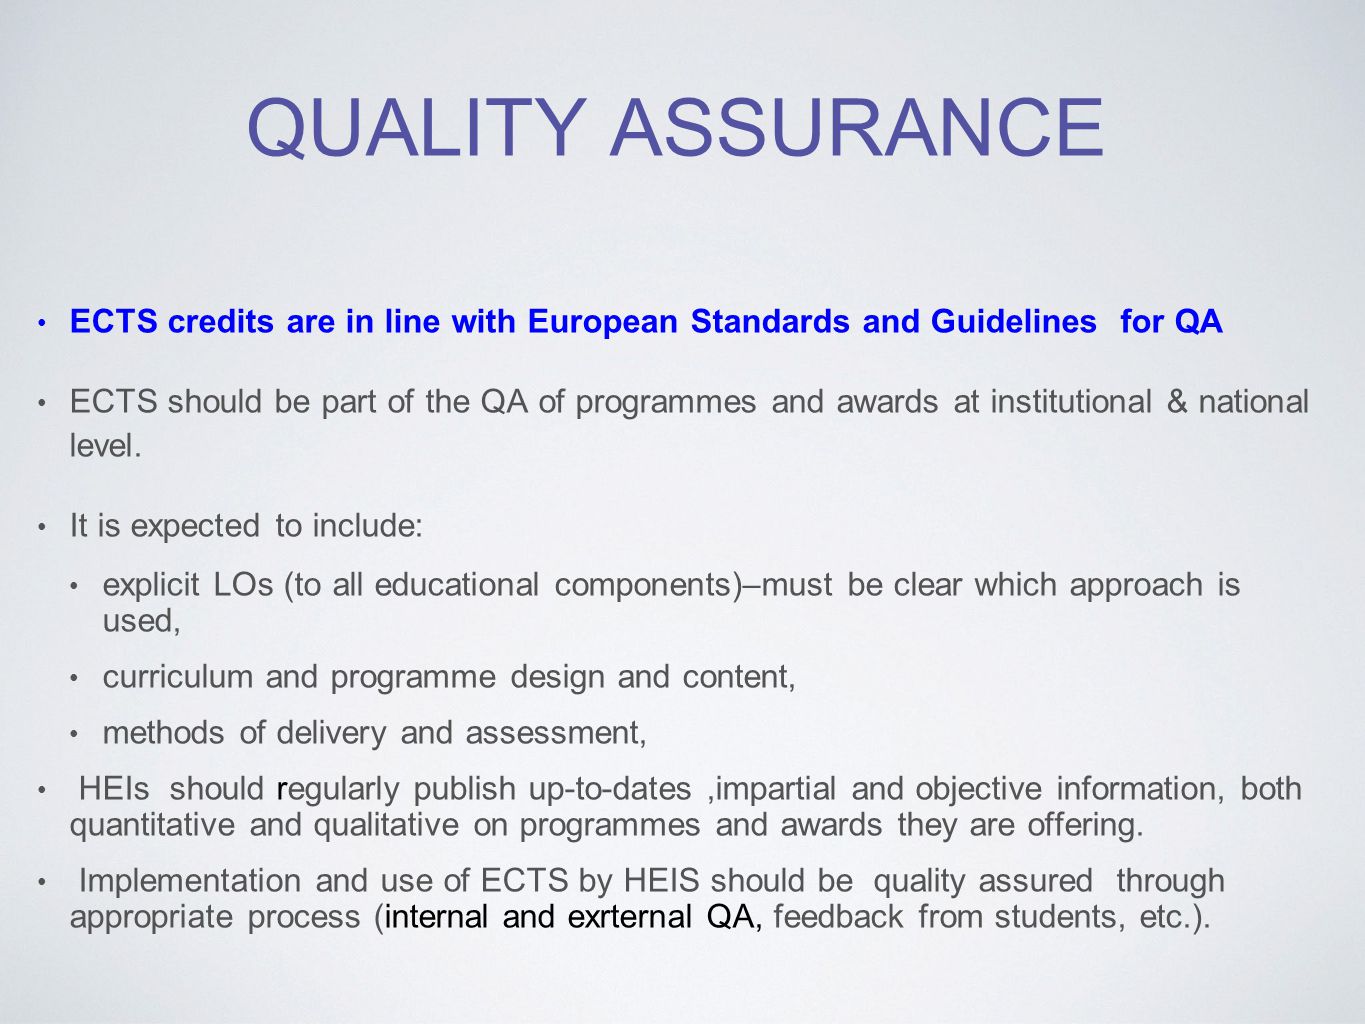 QUALITY ASSURANCE ECTS credits are in line with European Standards and Guidelines for QA ECTS should be part of the QA of programmes and awards at institutional & national level.